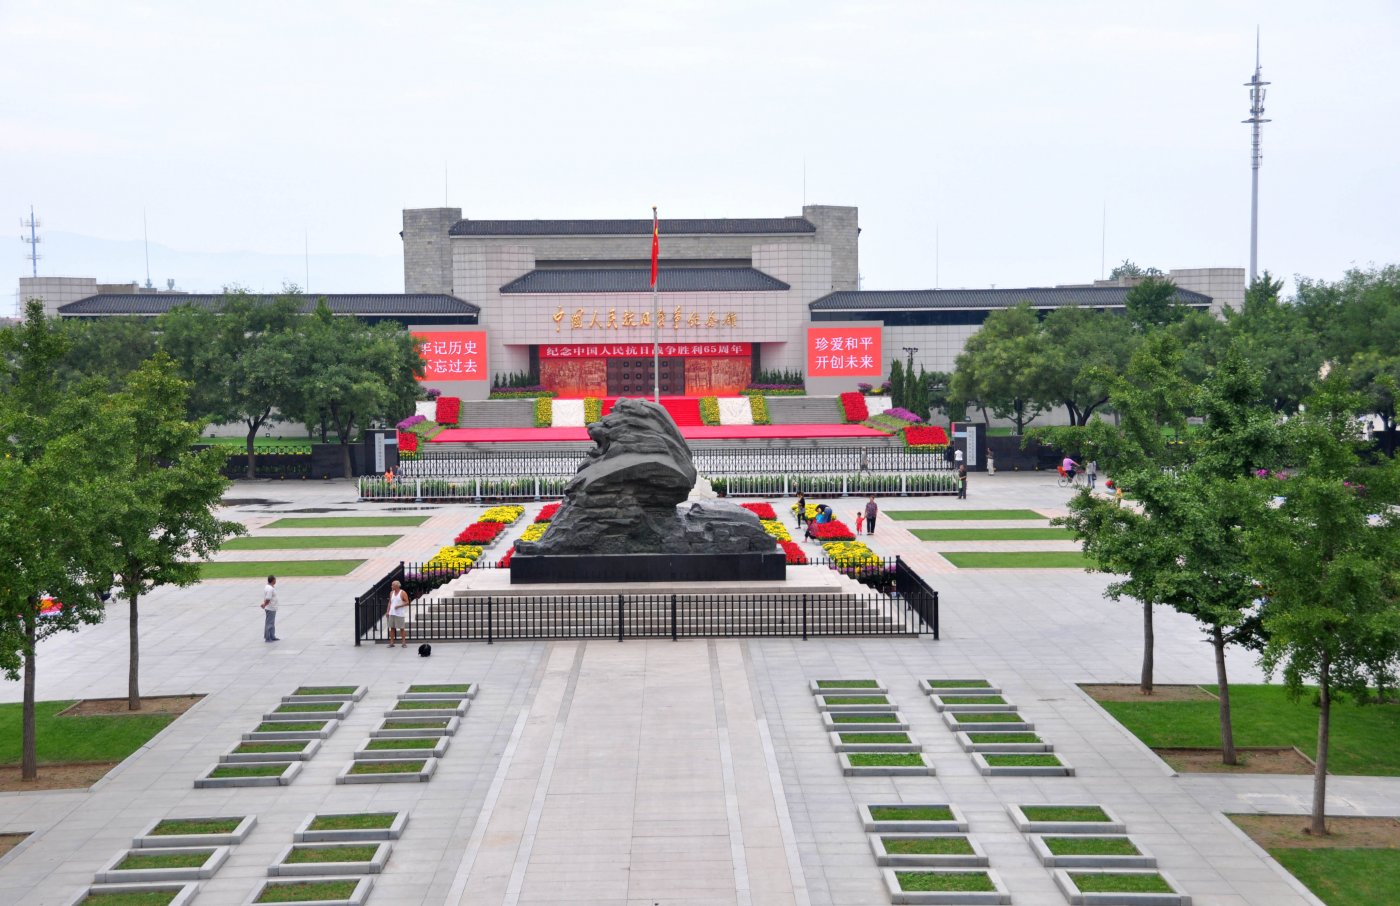 Chinese Anti-Japanese War Memorial Museum in China, East Asia | Museums - Rated 3.2